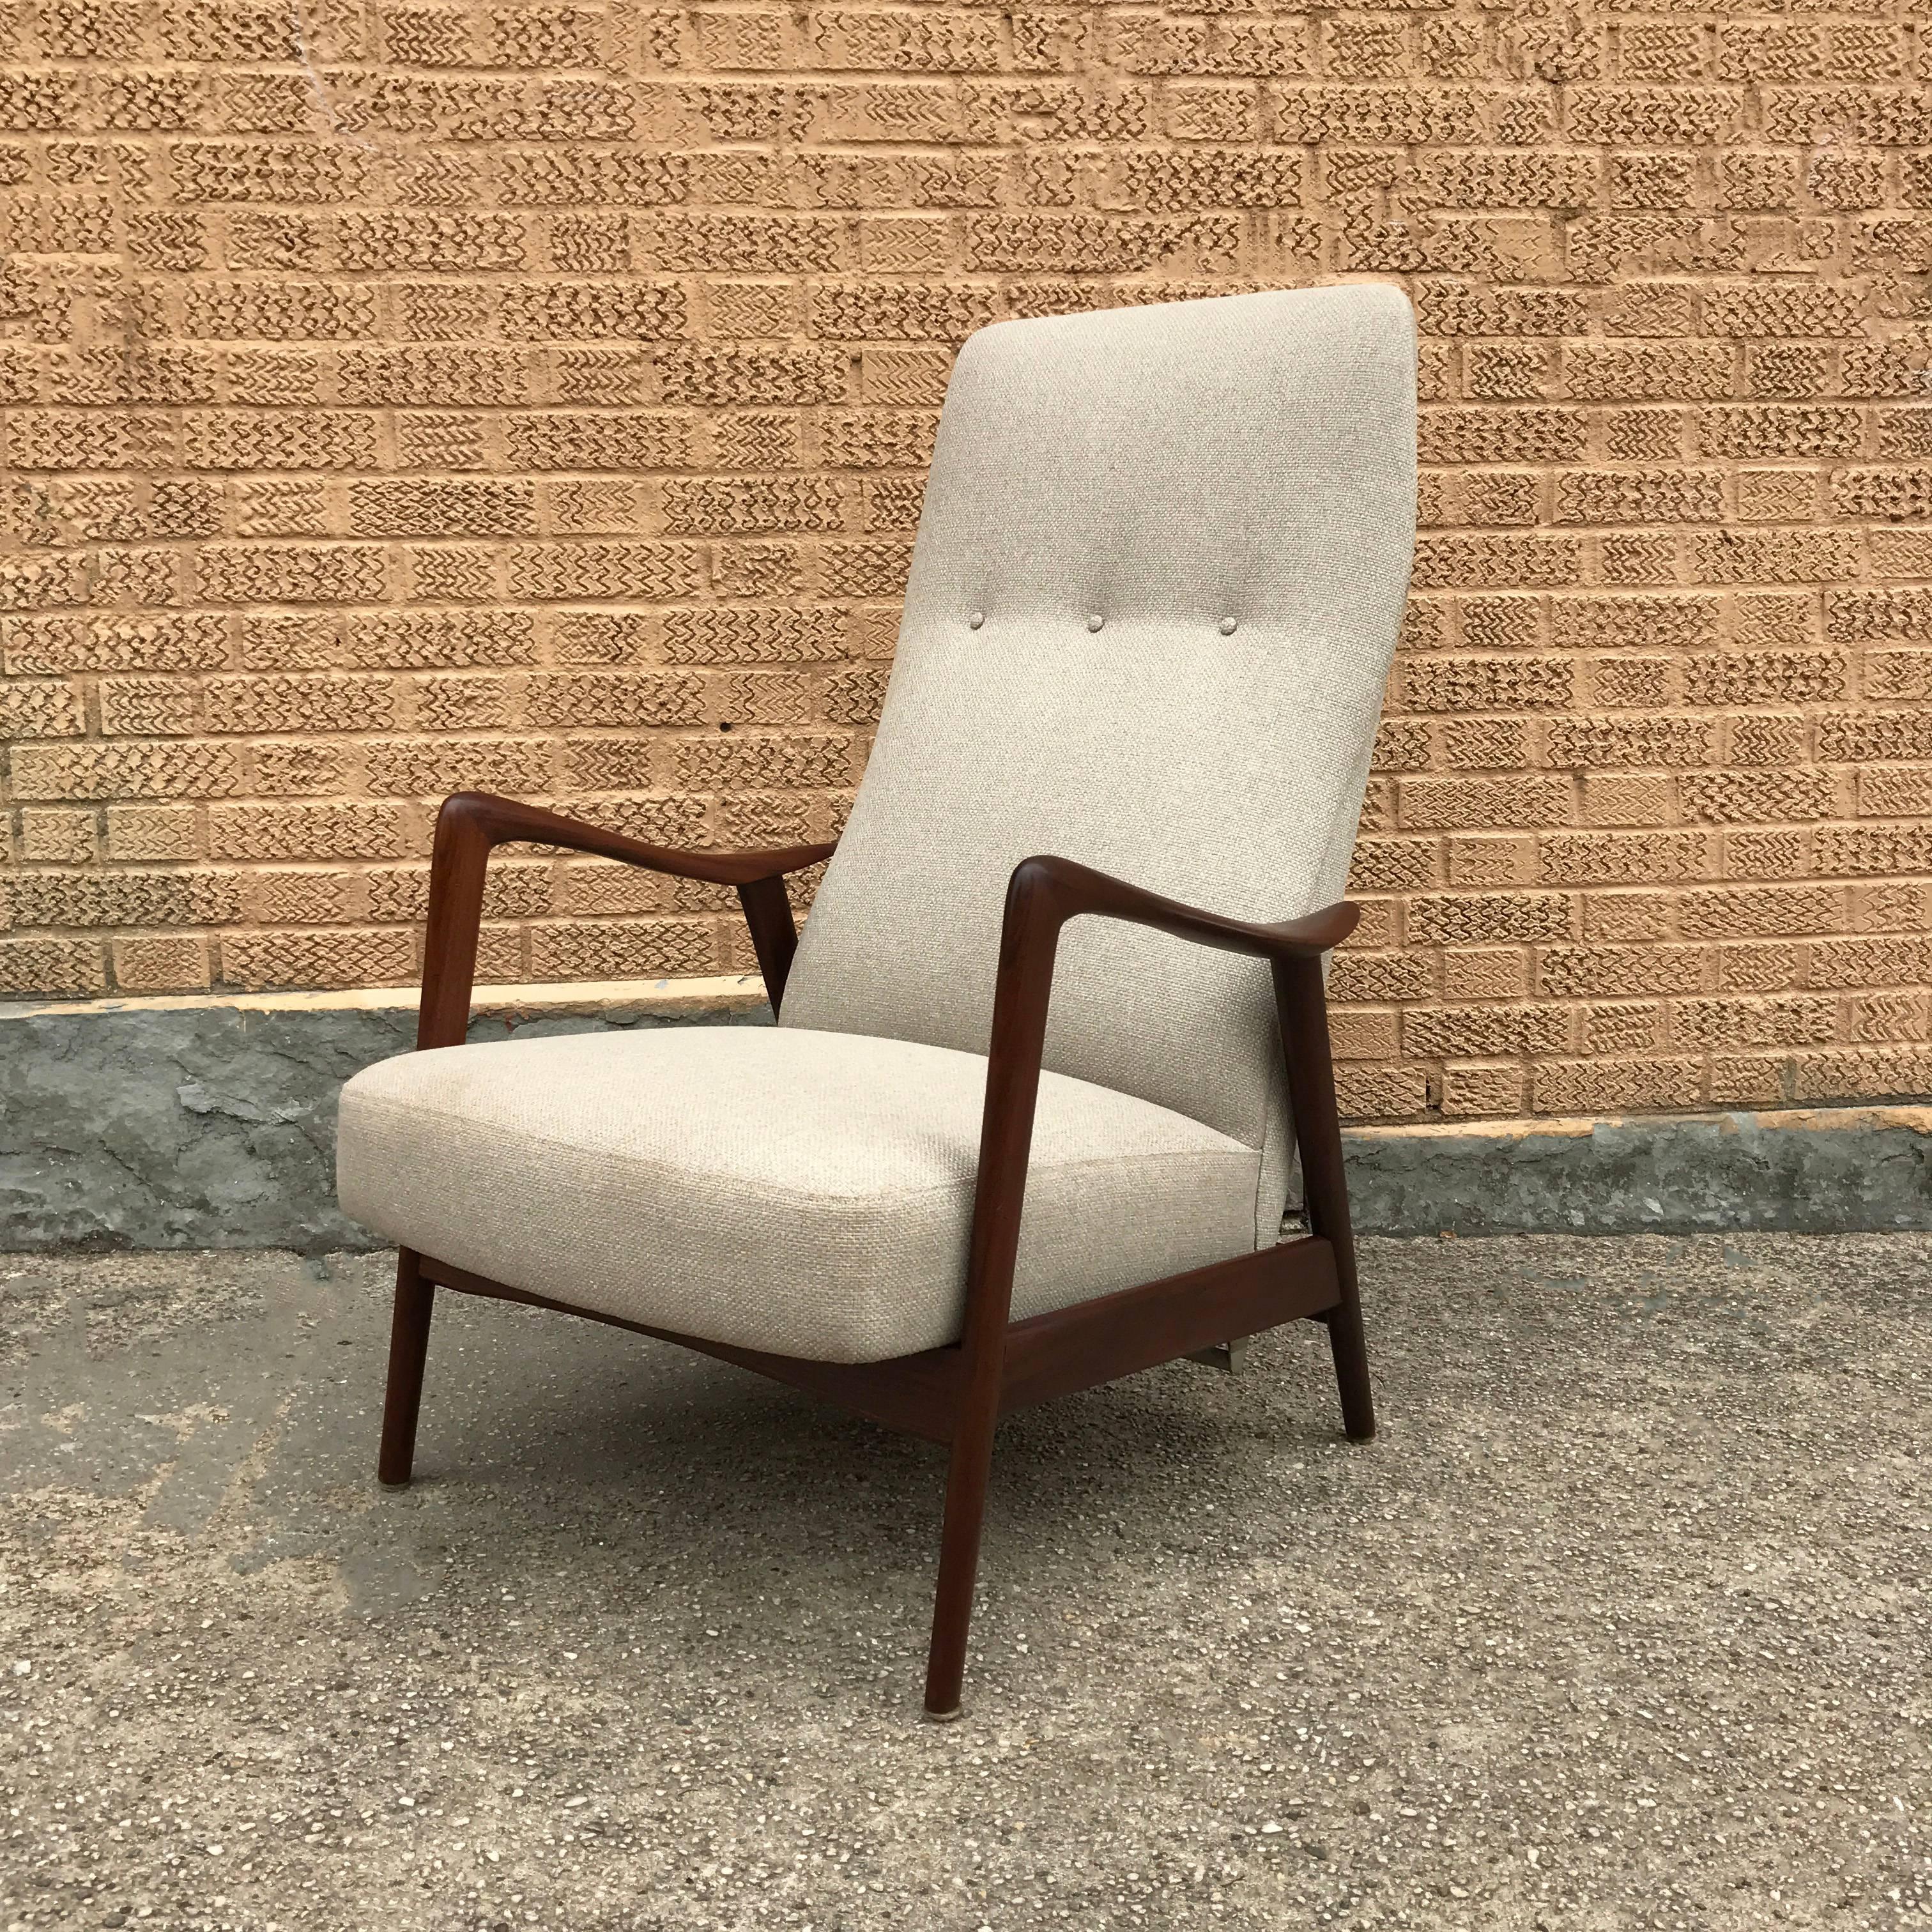 Scandinavian Modern, reclining lounge chair made in Norway and distributed by Westnofa, features a solid walnut frame and is newly upholstered in a woven cotton blend.